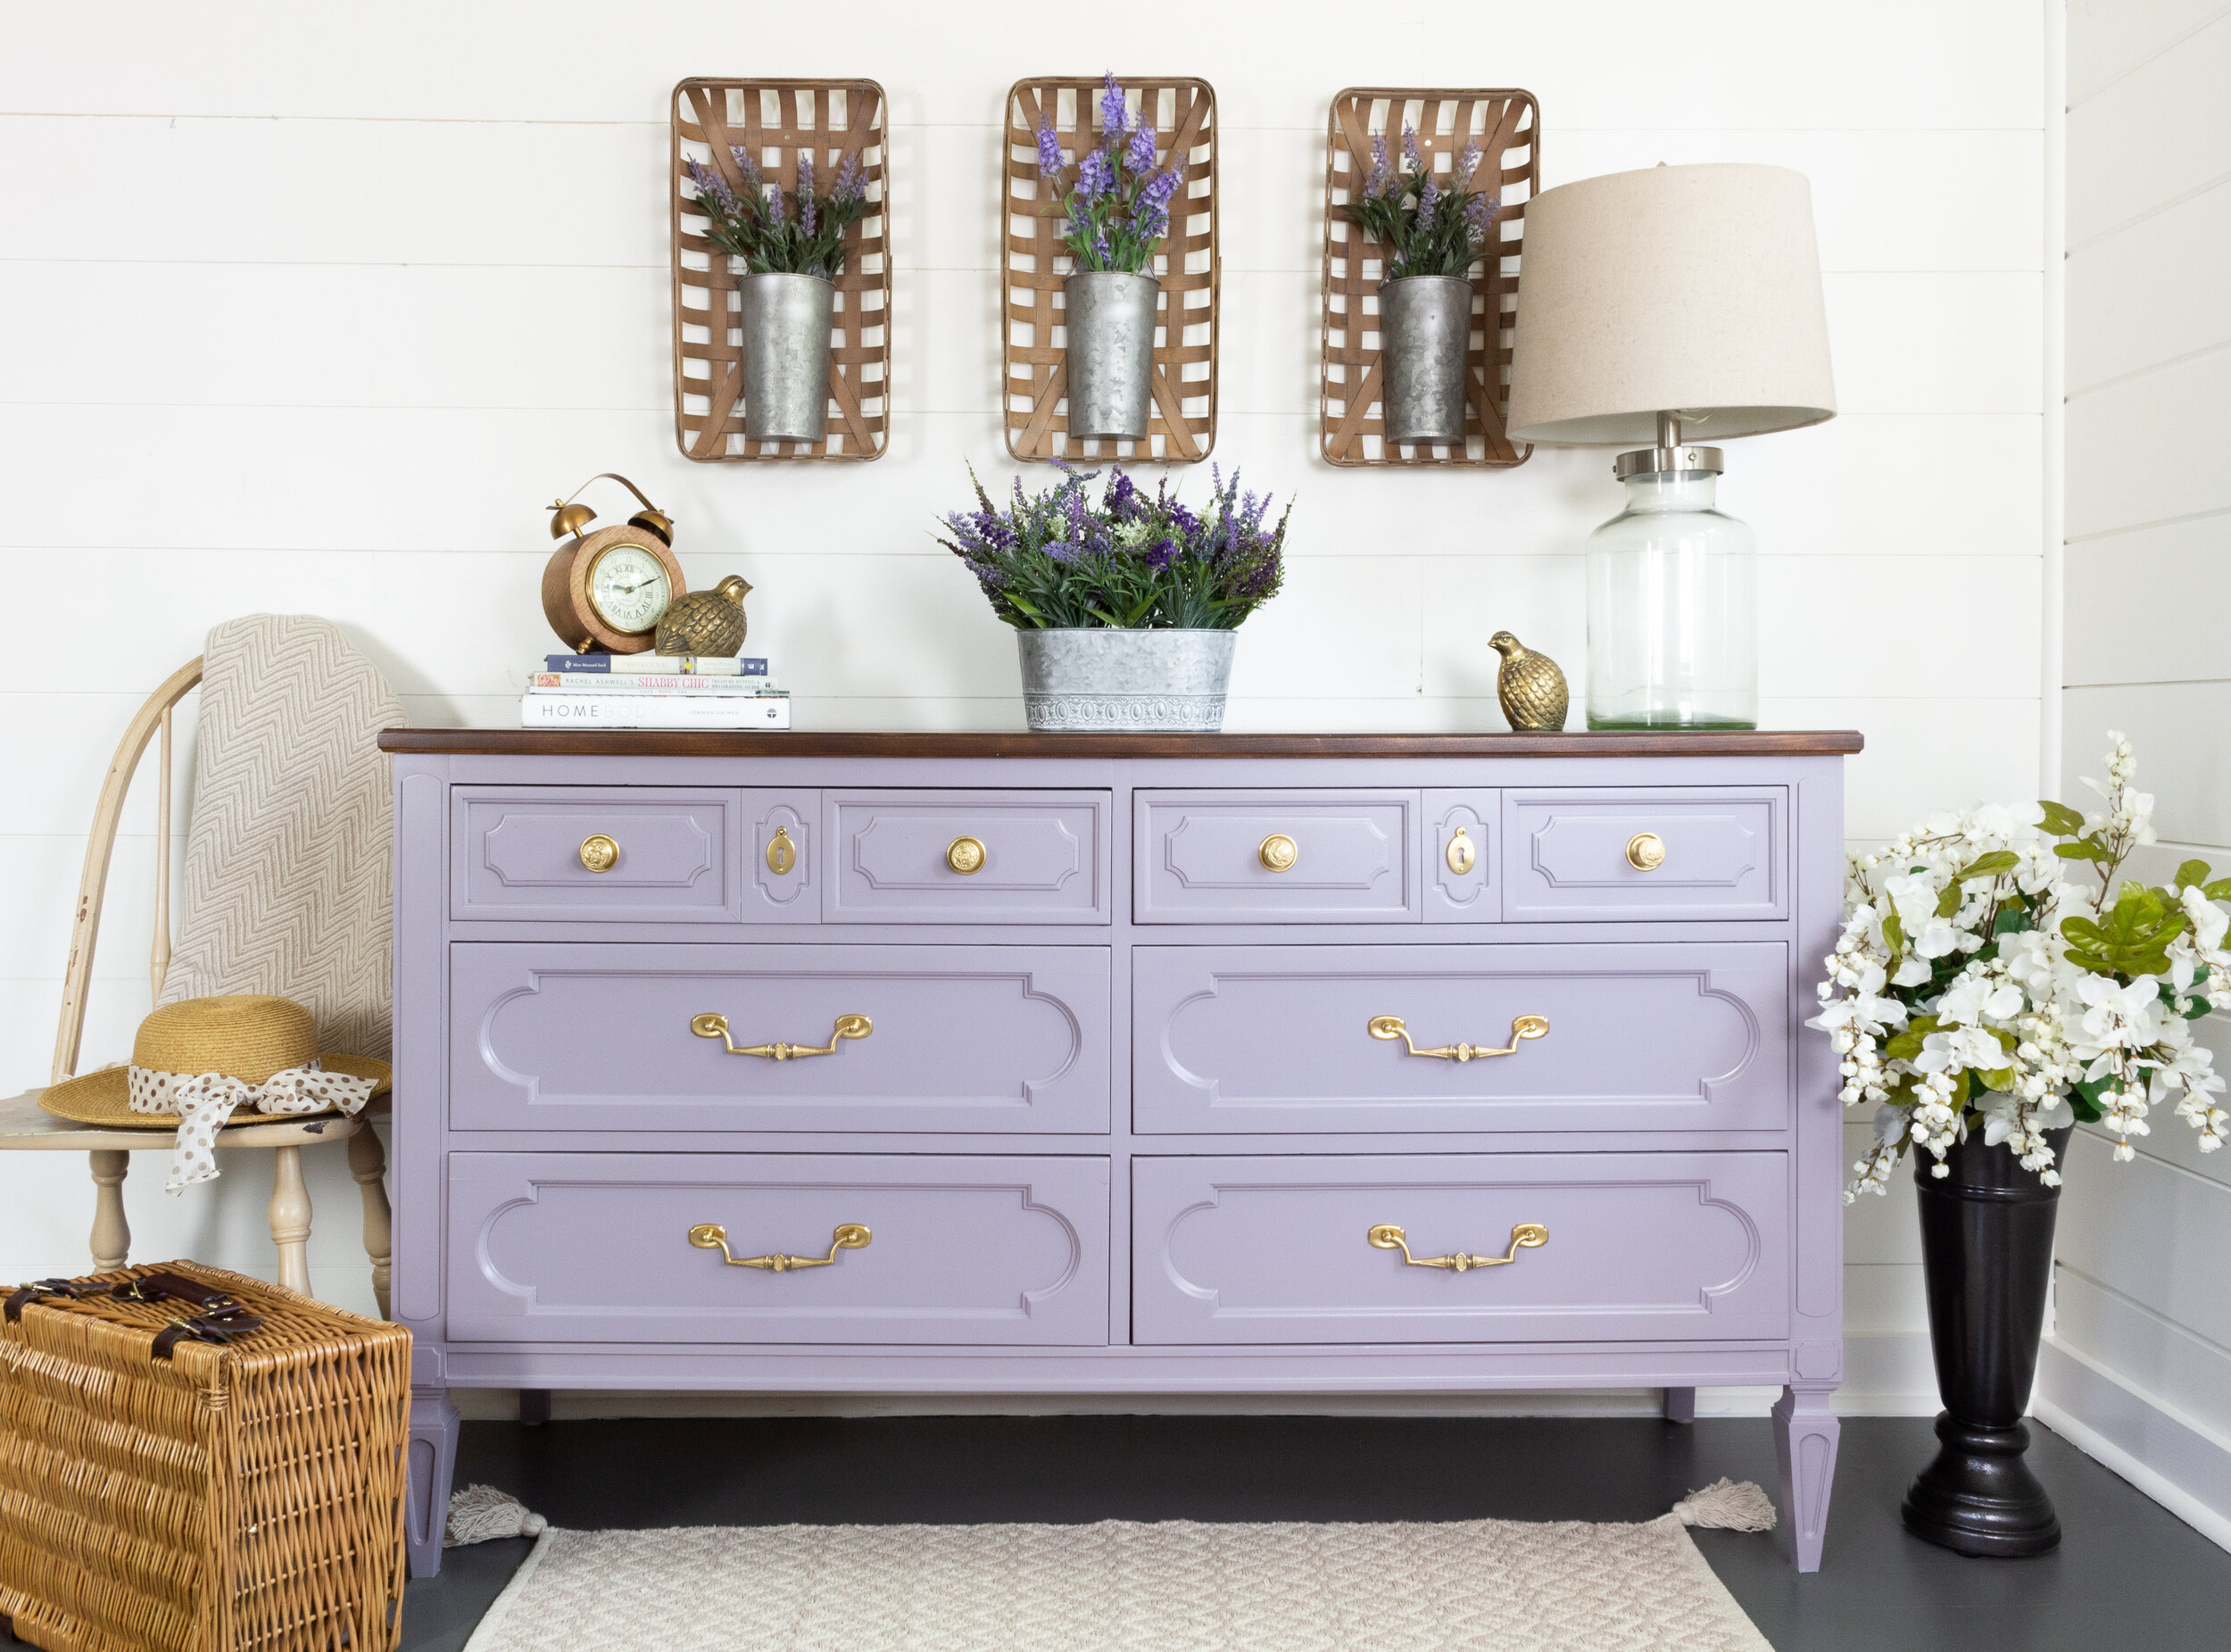 How to Use Fusion Mineral Paint - Lemons, Lavender, & Laundry